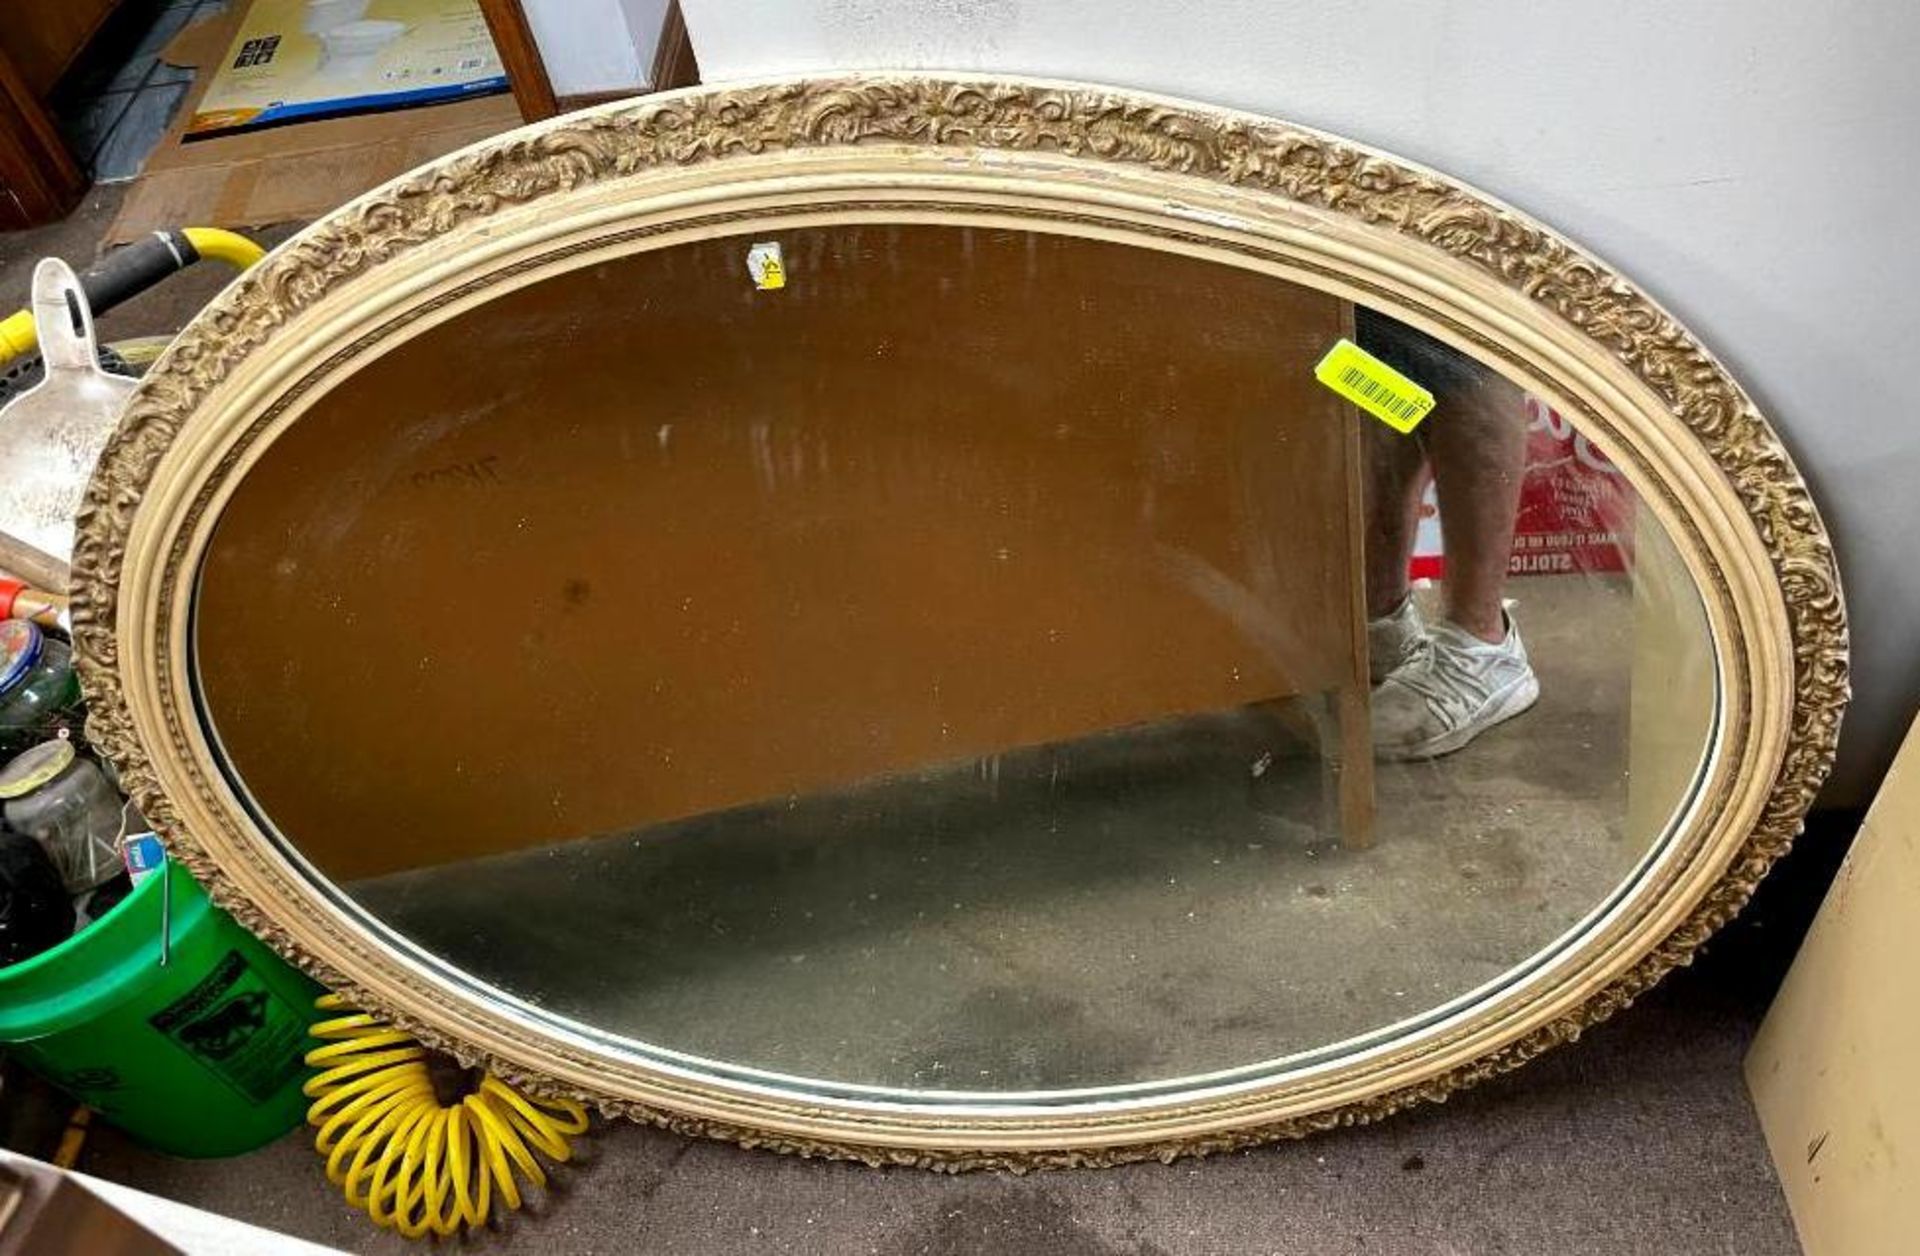 DESCRIPTION: DECORATIVE FRAMED OVAL MIRROR SIZE: 44"X36" LOCATION: OFFICE QTY: 1